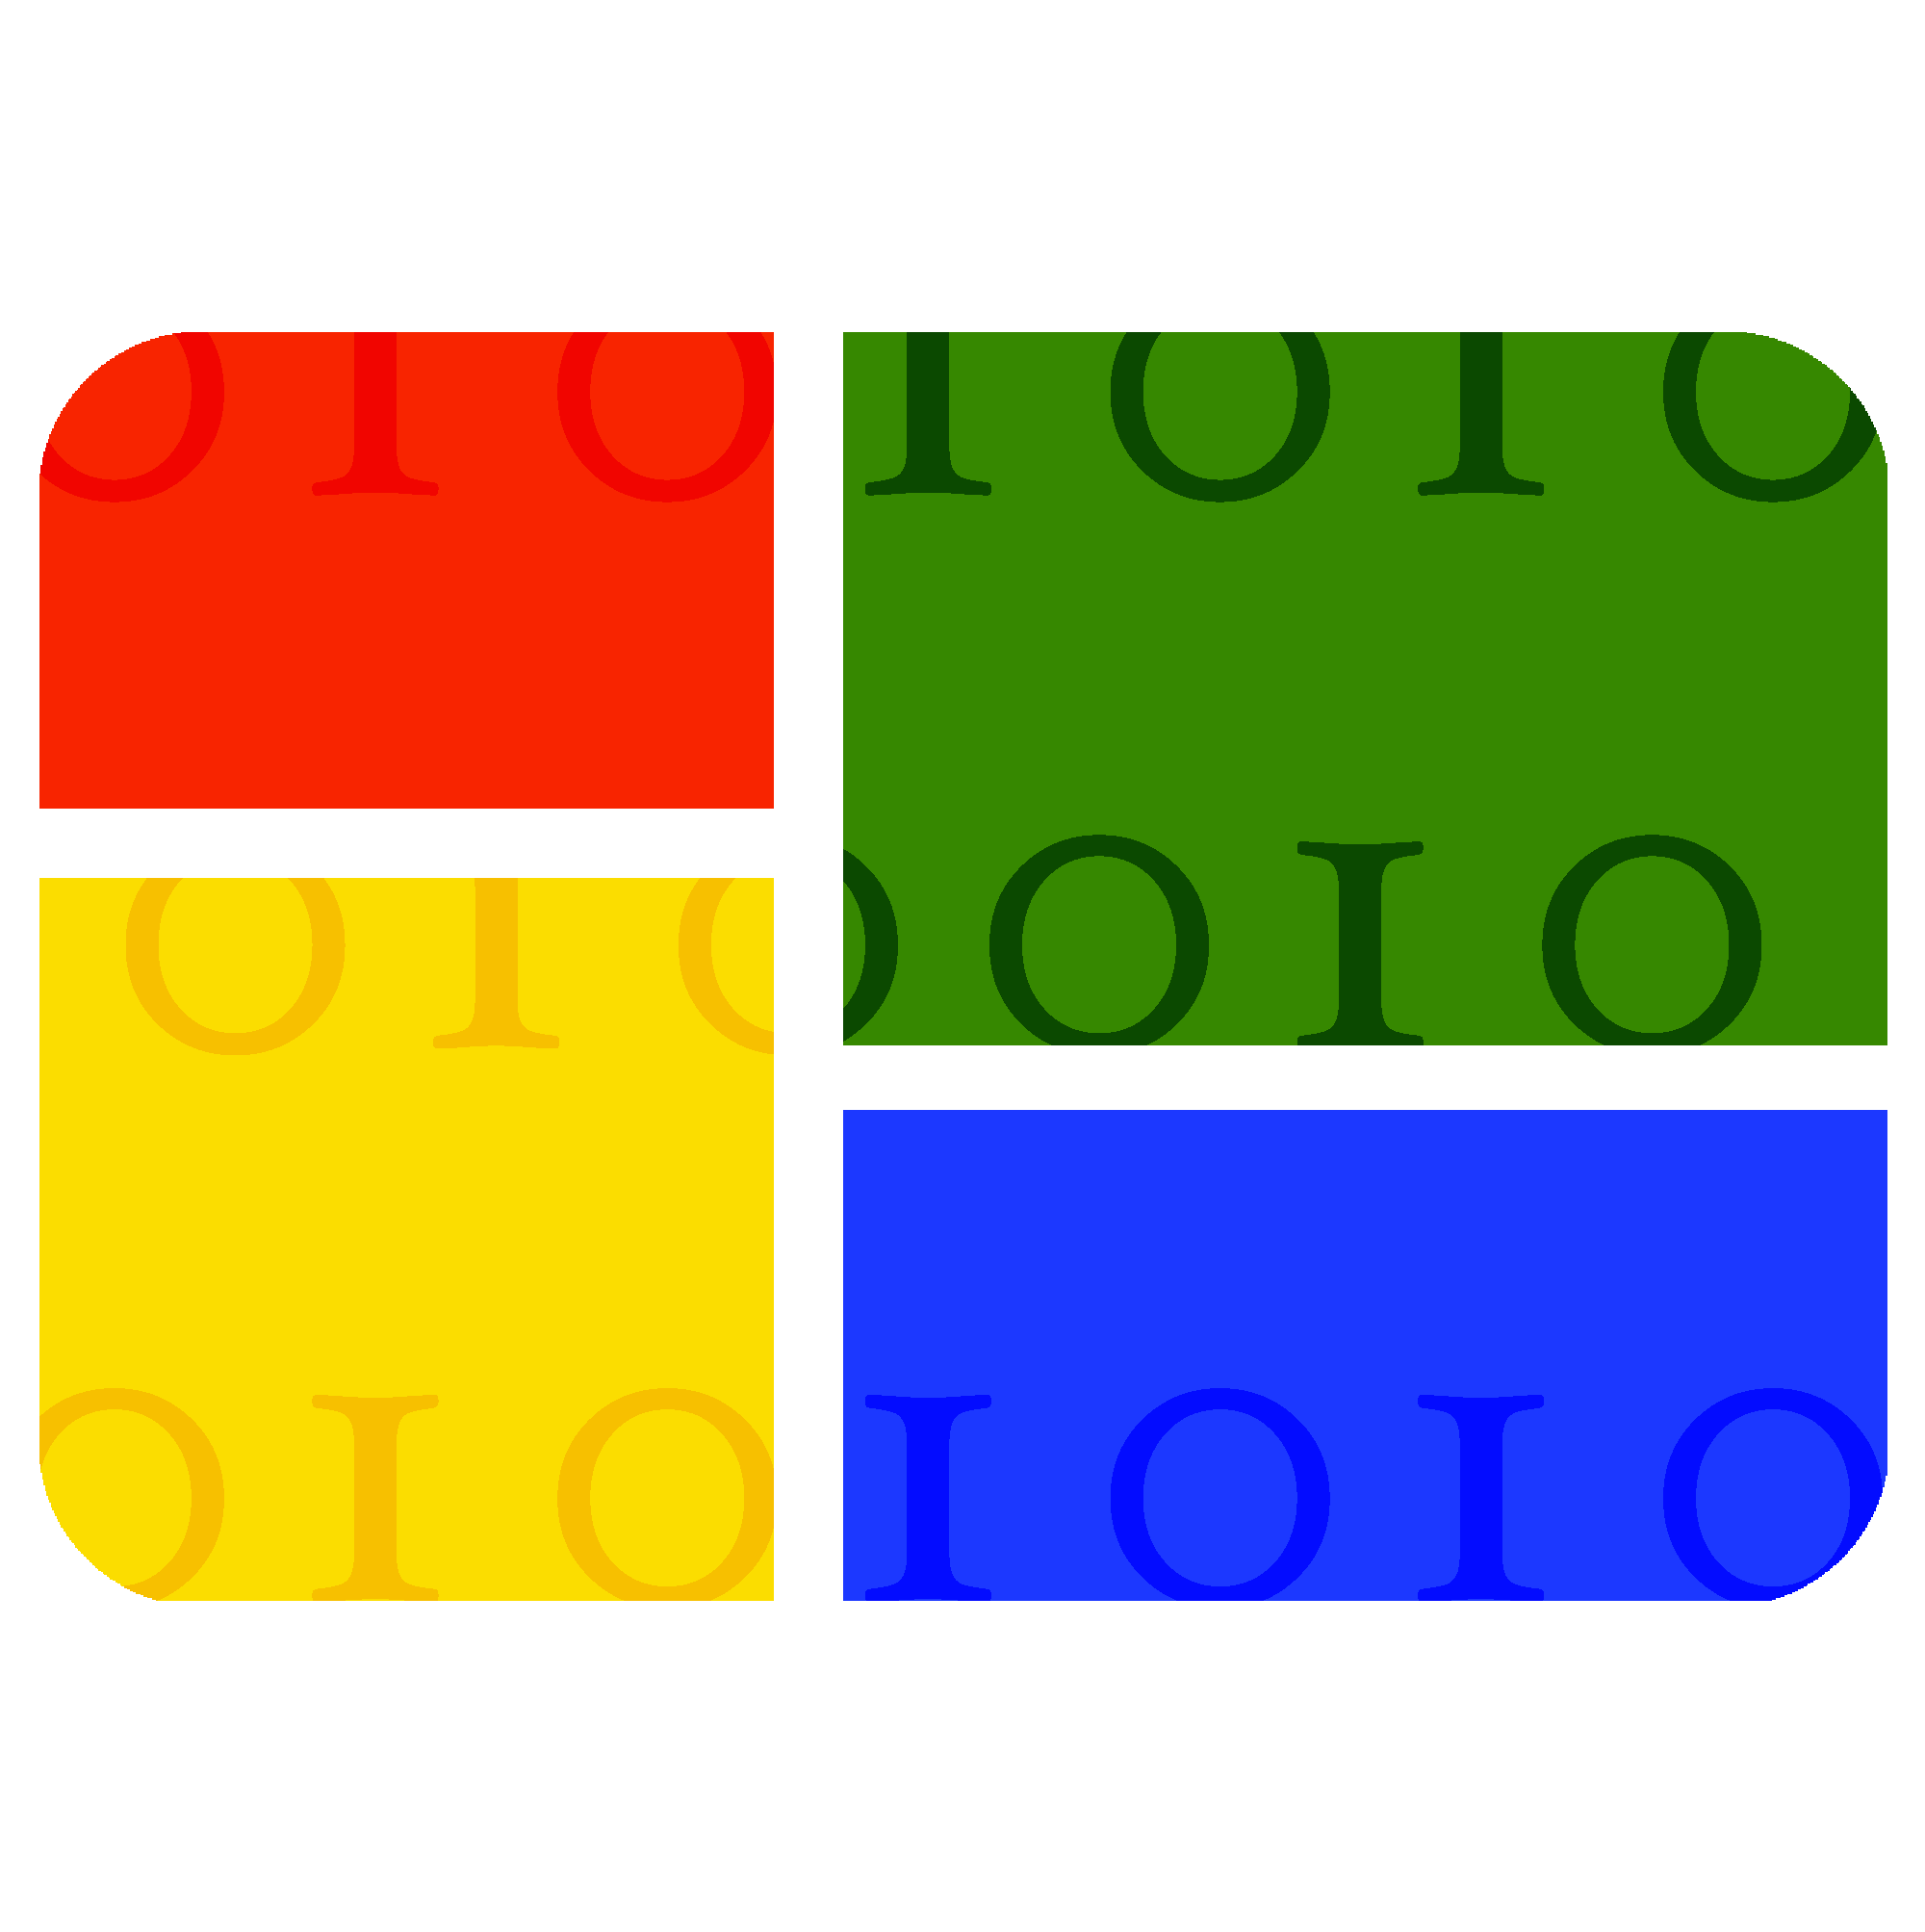 Old Windows Logo - Real Windows logos in the style of the old Windows 10000 logo ...